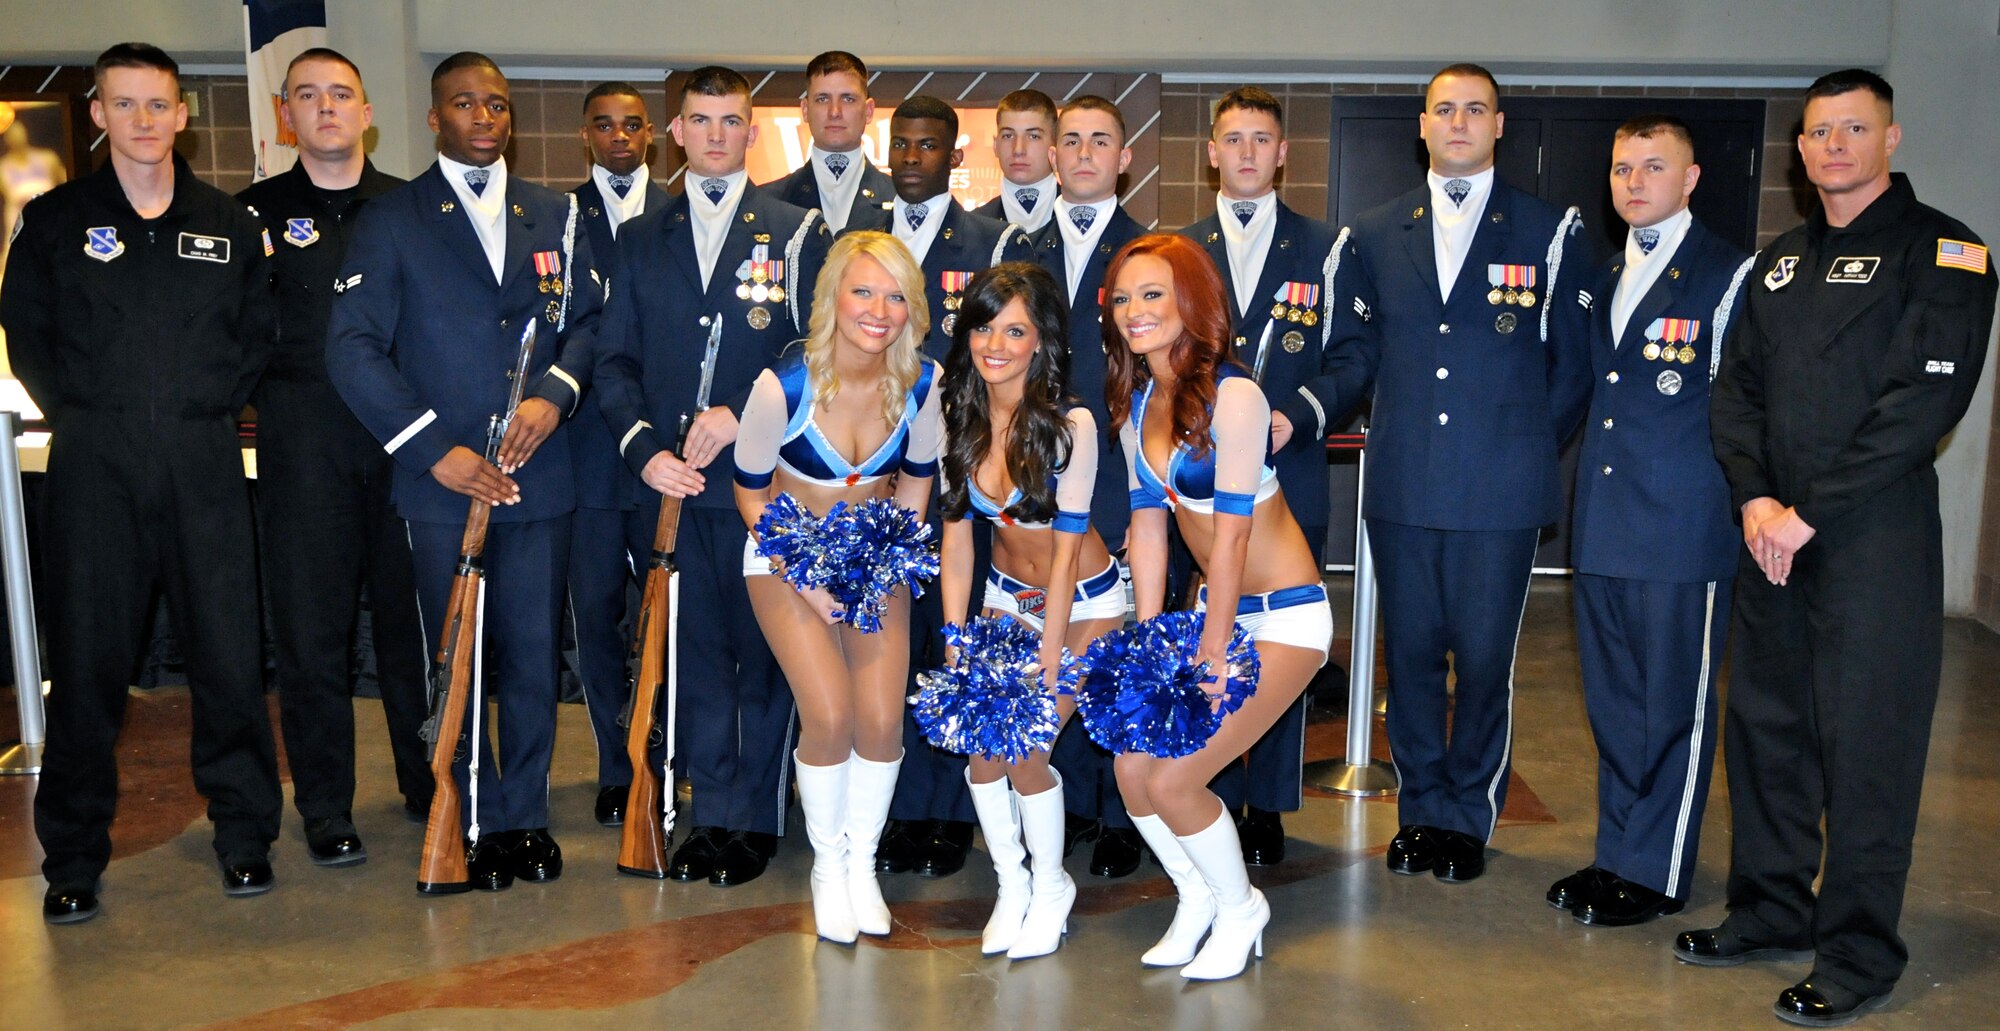 The U.S. Air Force Honor Guard drill team was cheered on the Oklahoma City Thunder Cheerleaders Feb. 15 at the thunder stadium. The drill team performed the halftime show during the game, representing service members for military appreciation night. (U.S. Air Force photo by Airman 1st Class Tabitha N. Haynes)